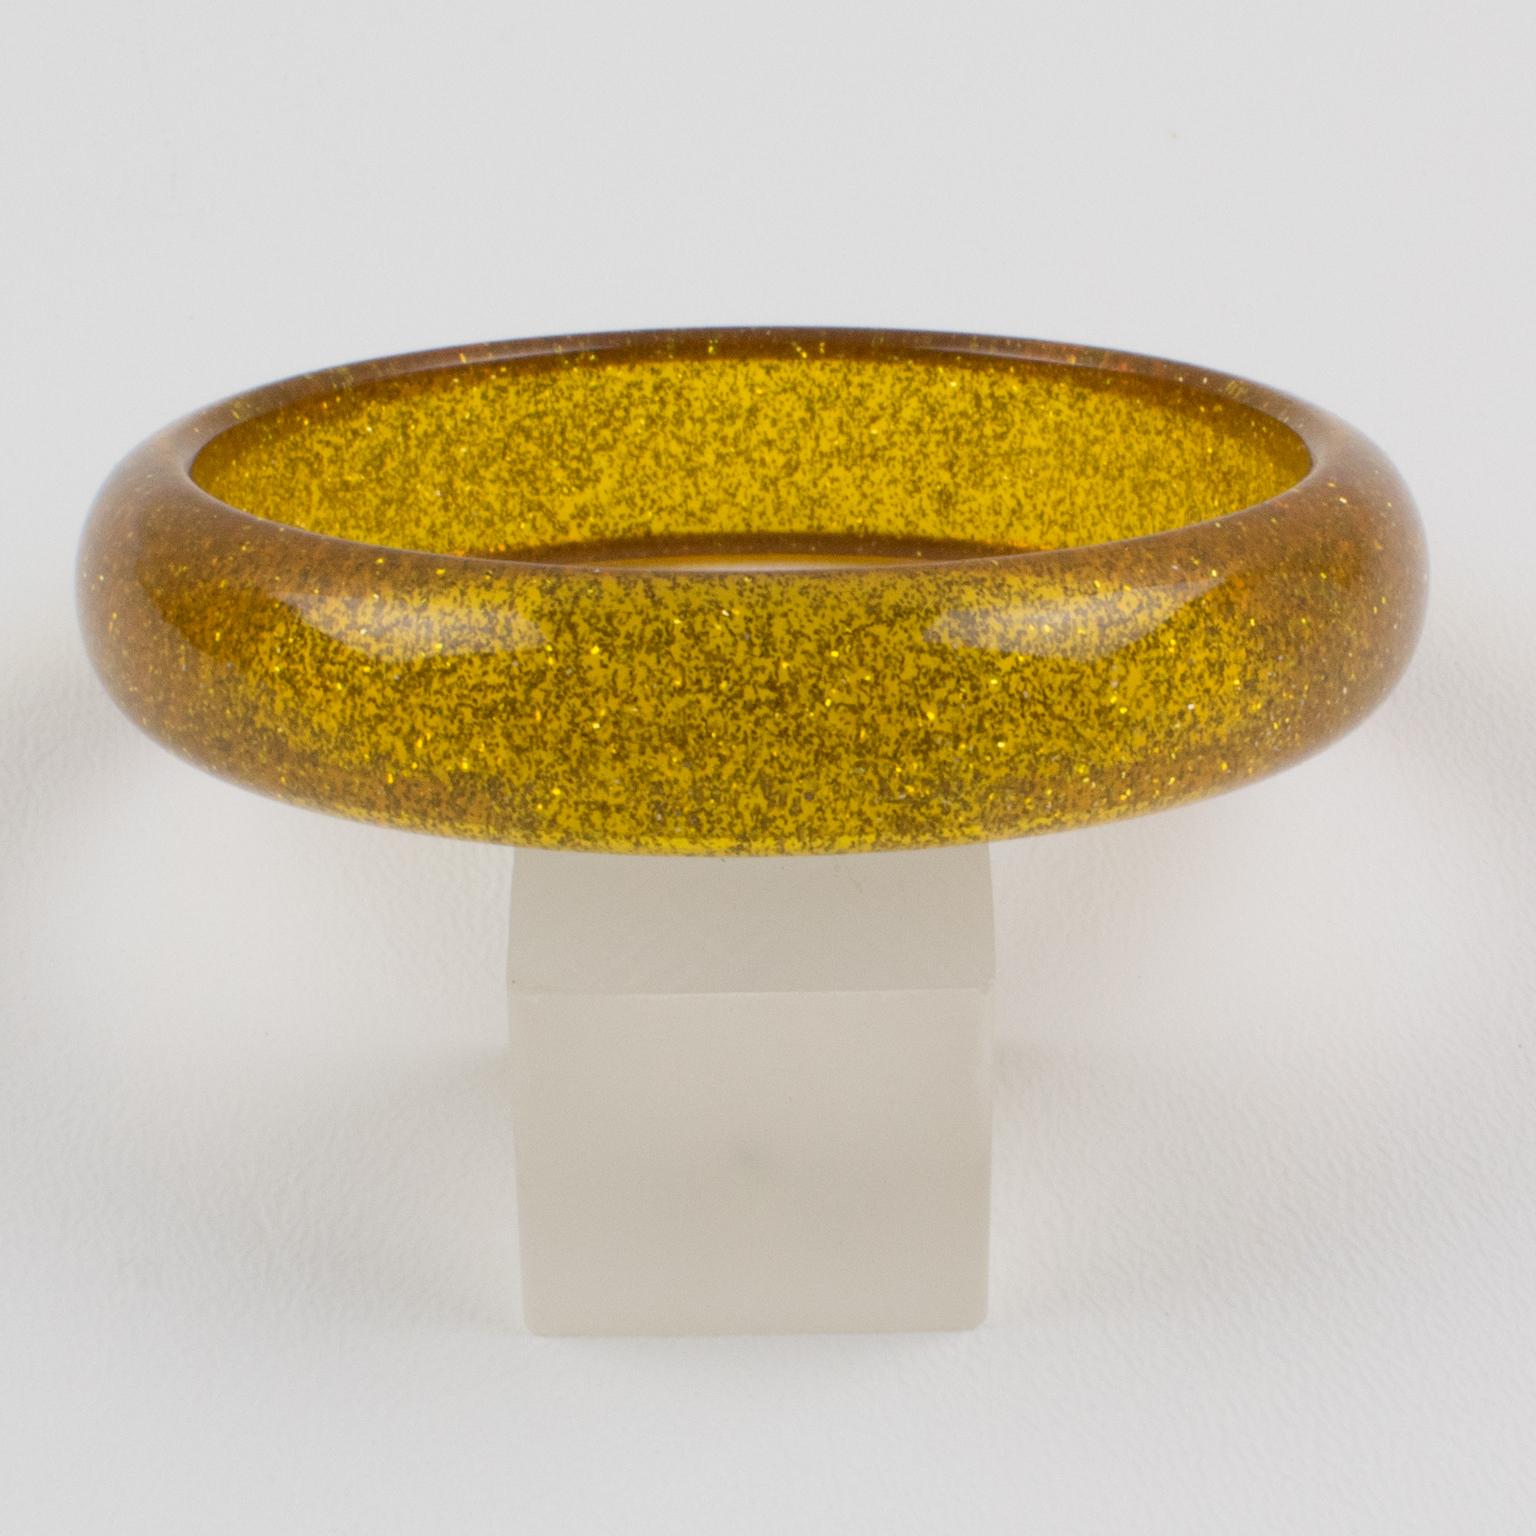 Charming Lucite bracelet bangle. The bangle has a domed shape and is comprised of transparent yellow marigold Lucite which is injected with metallic confetti inclusions in gold color. The metallic confetti glitter is like those of Christmas